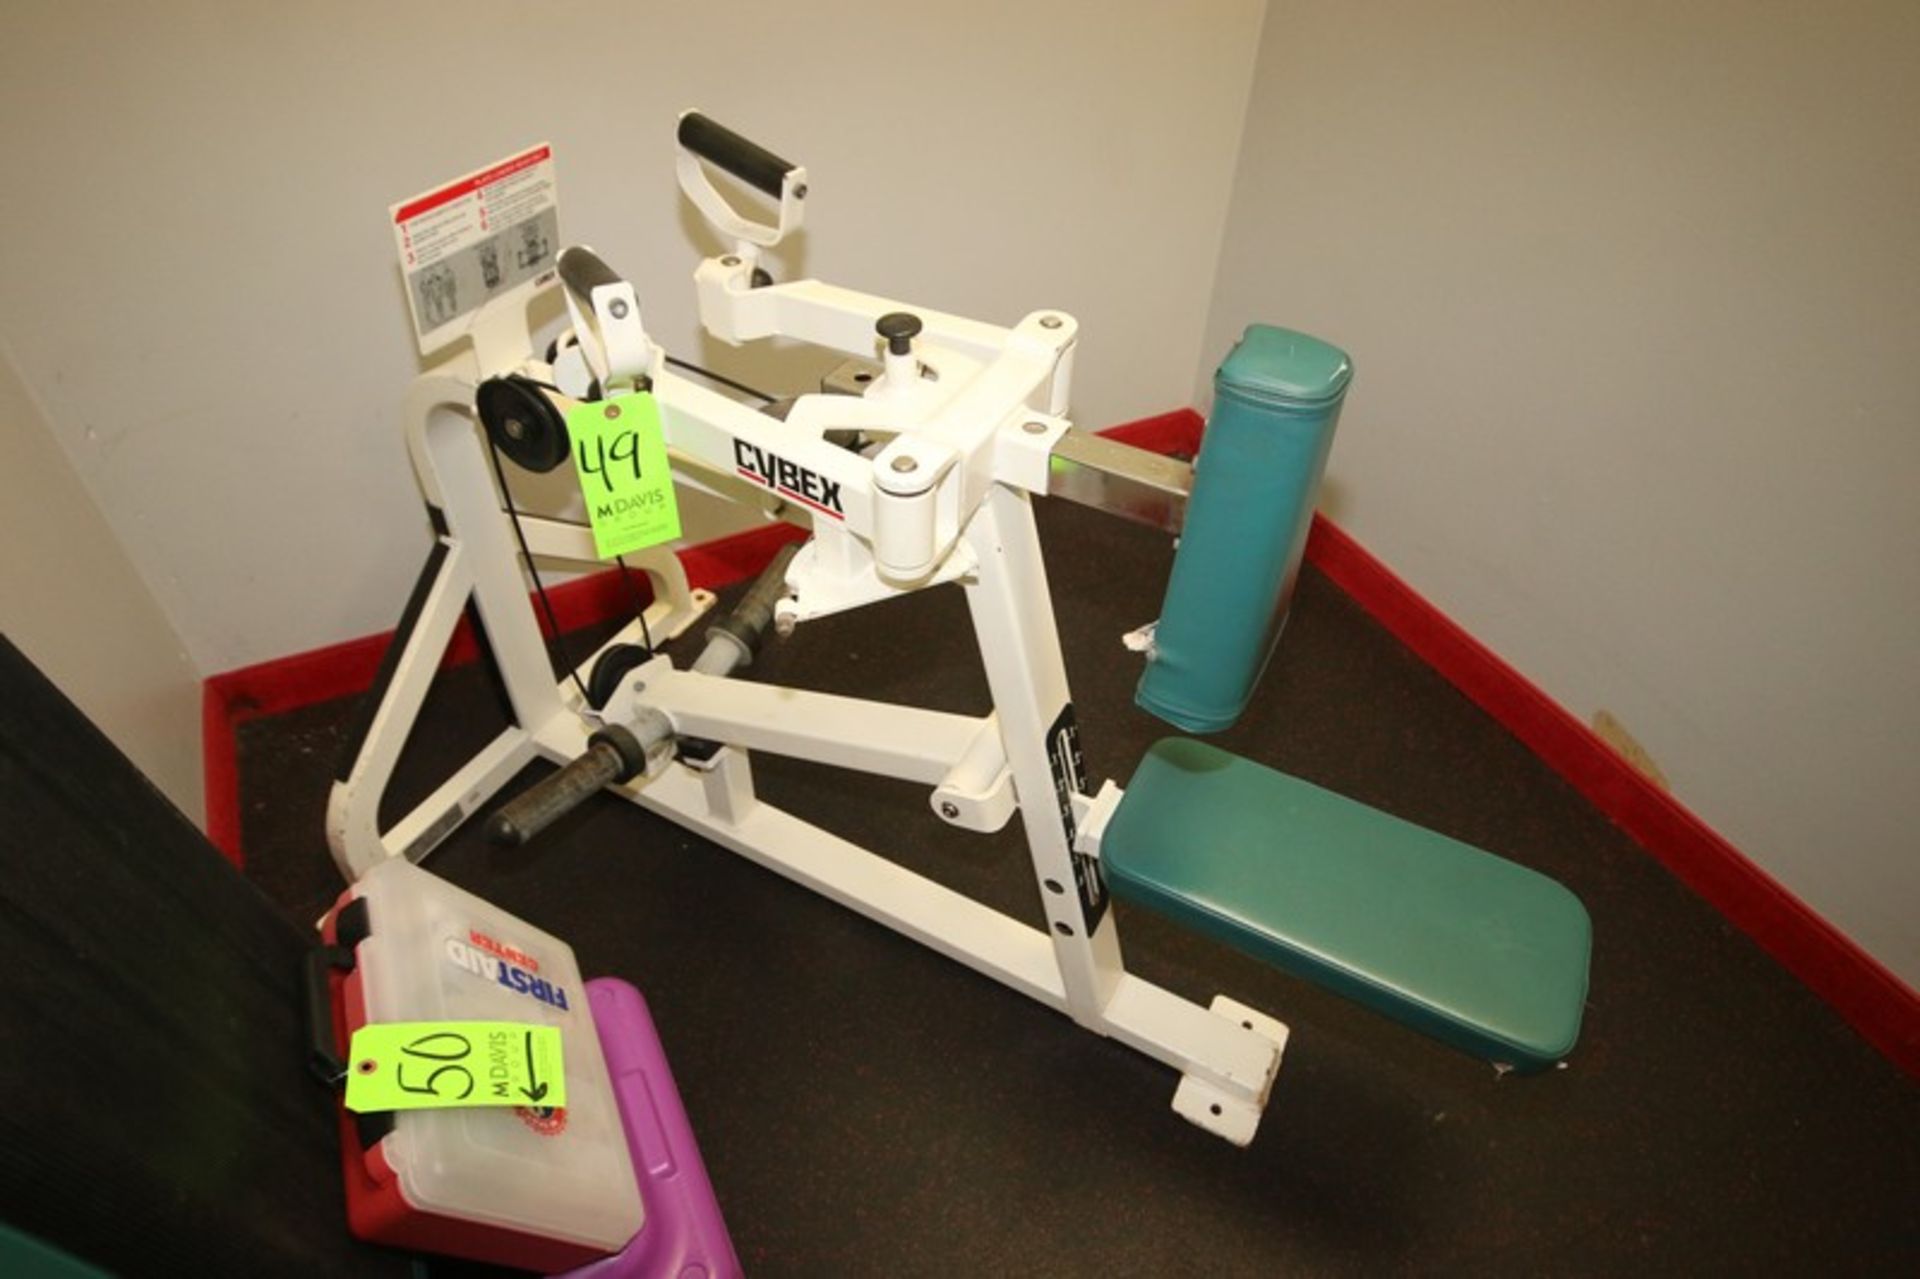 Cybex Rear Delt Cable Row Machine, Overall Dims.: Aprox. 57" L x 34" W x 38" H (LOCATED @ 2800